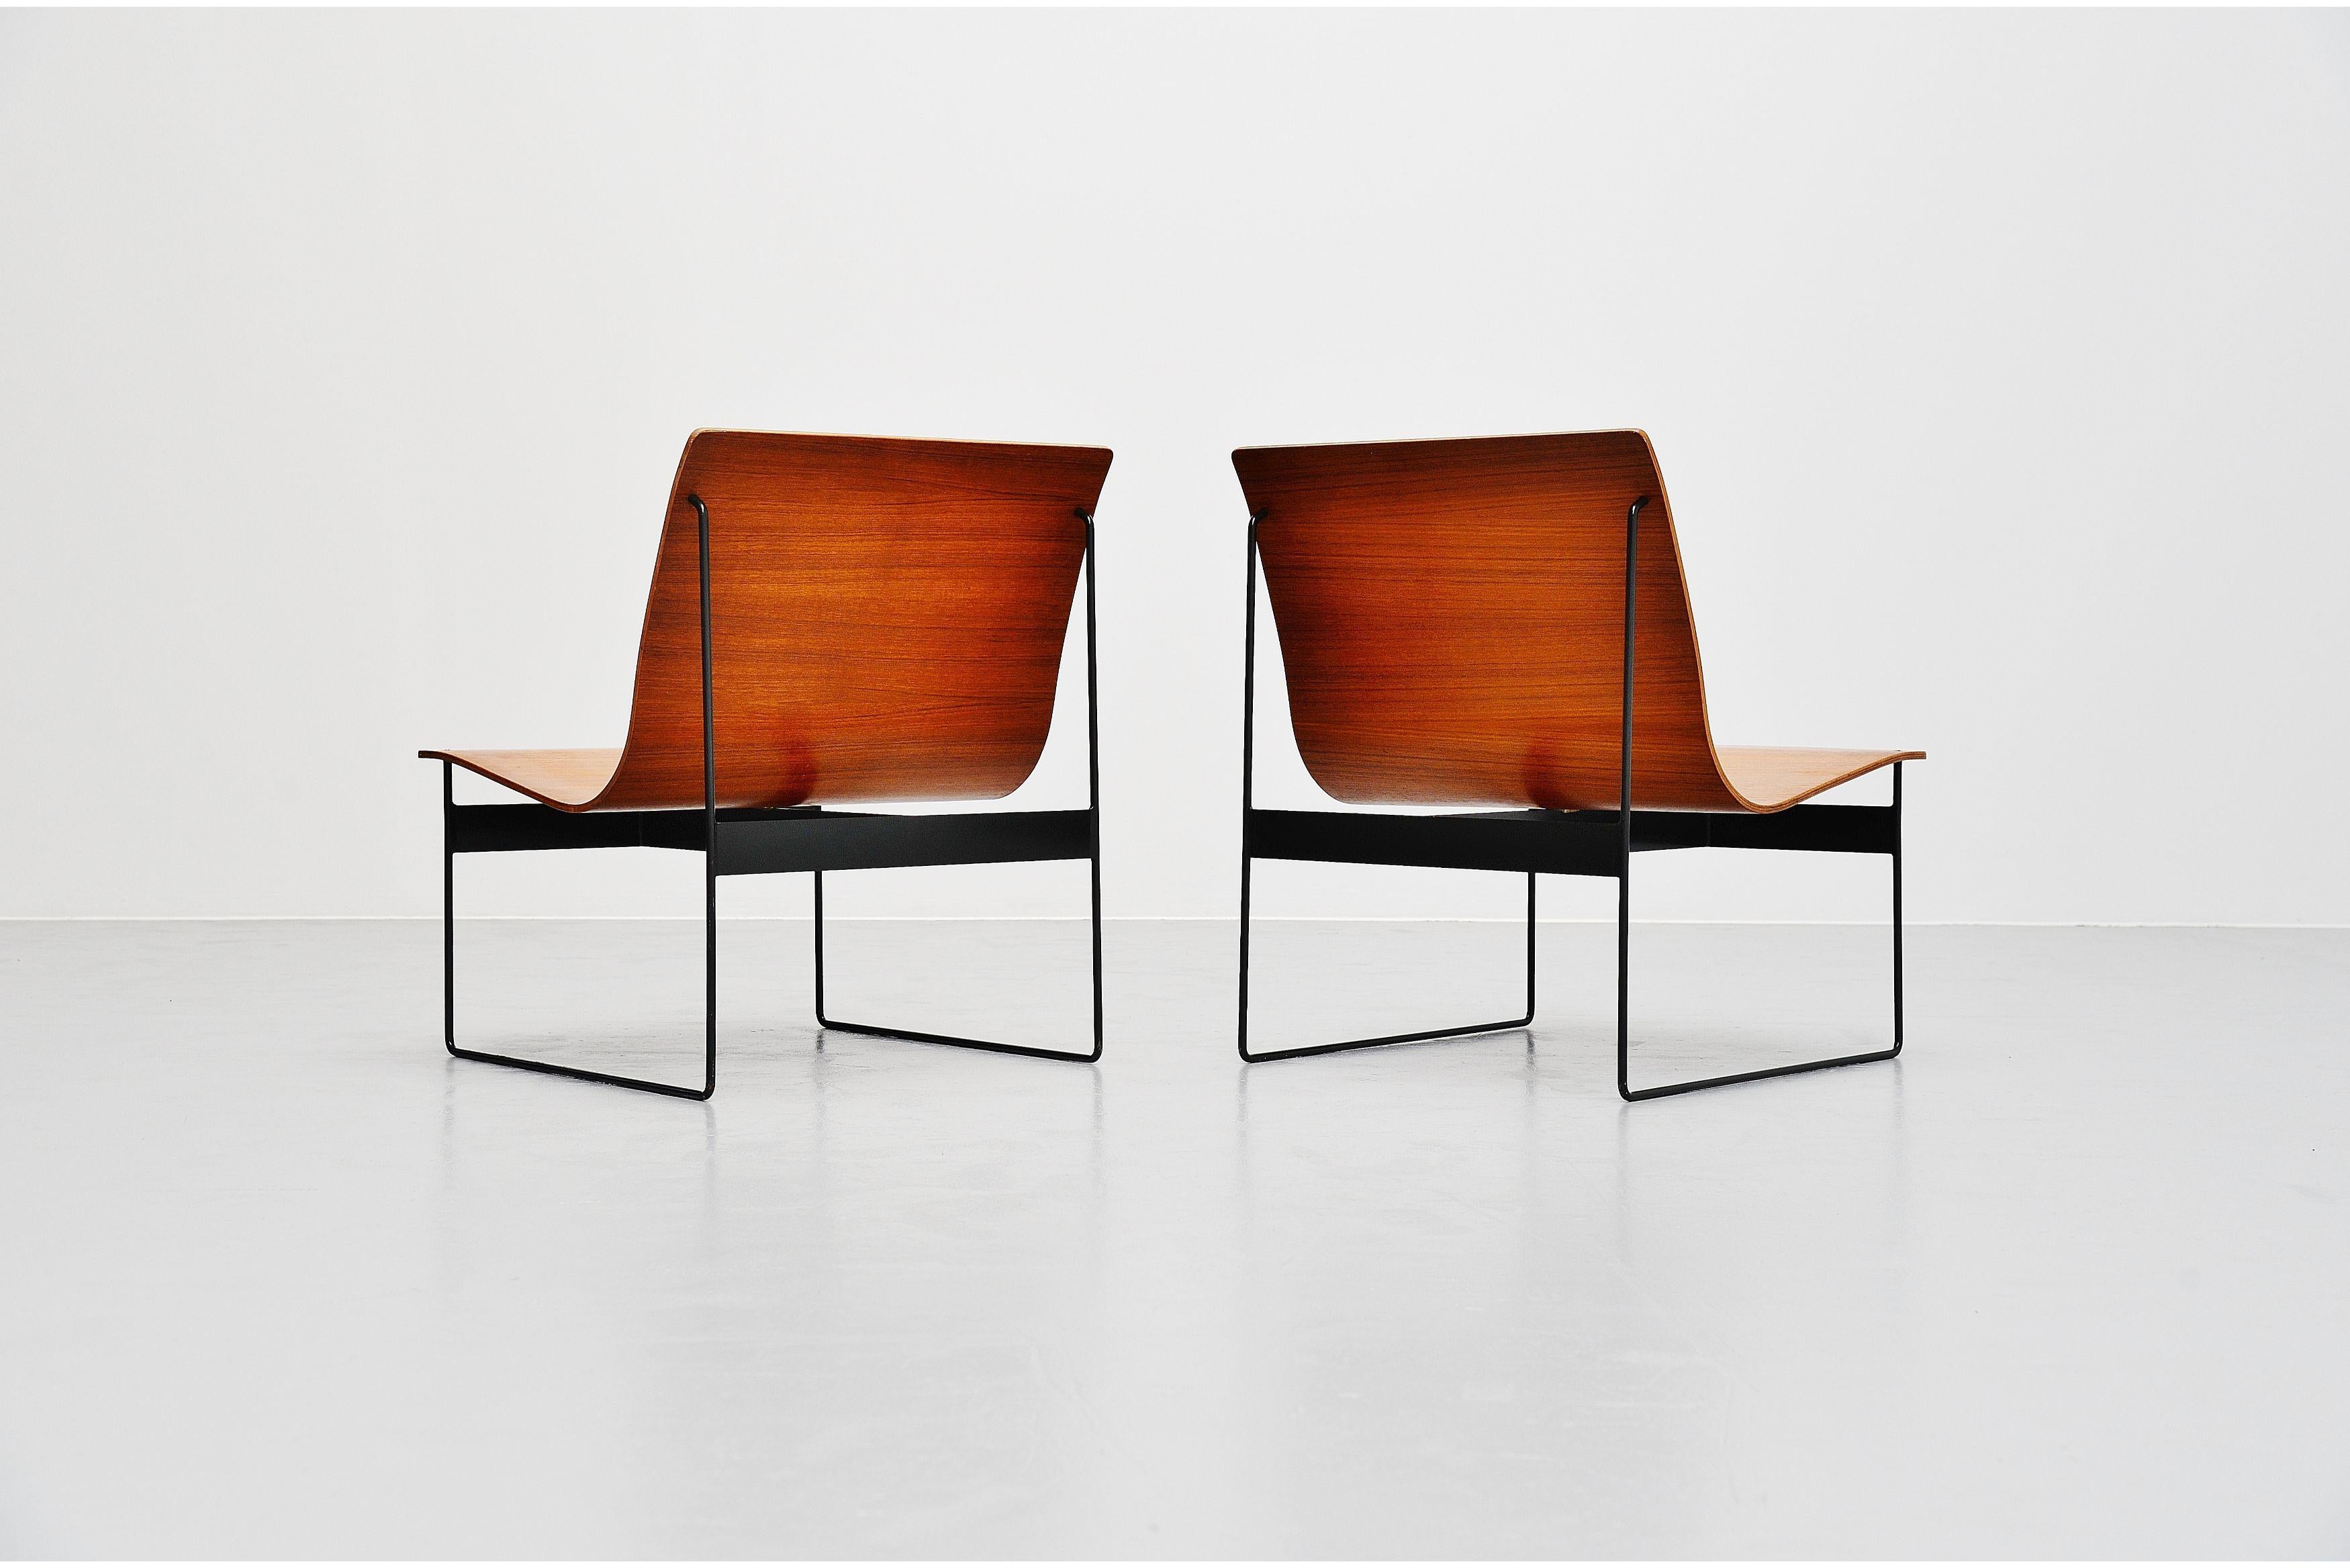 Stunning pair of teak plywood lounge chairs designed by Günter Renkel and manufactured by Rego, Germany, 1959. These chairs are made of teak plywood and have solid metal sophisticated sledge frames, very dark grey lacquered. The chairs have a very